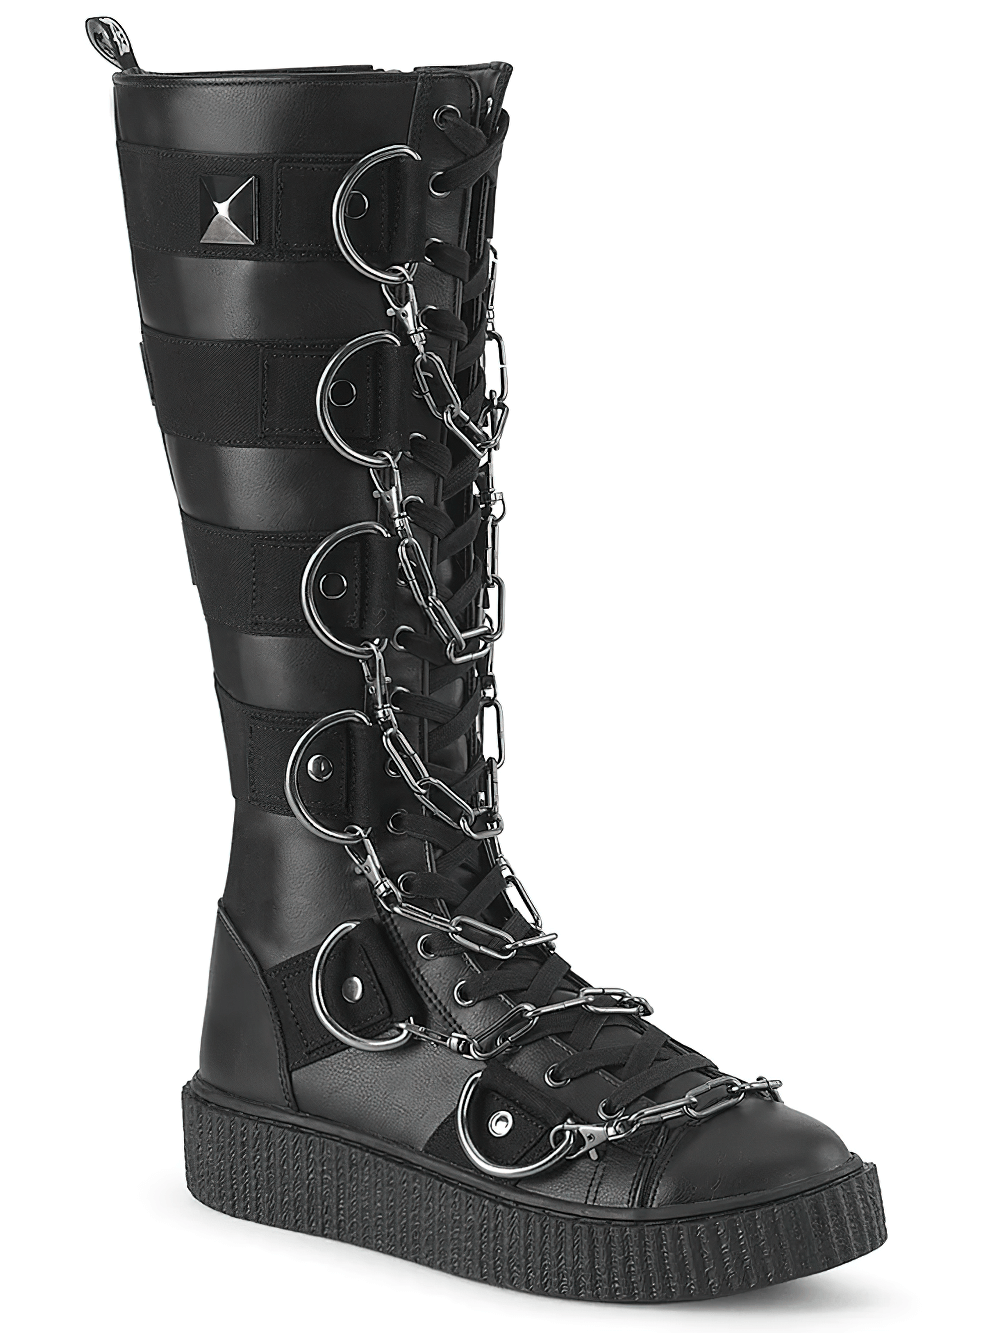 DEMONIA Lace-Up Knee-High Creeper Boot with Chain Detail